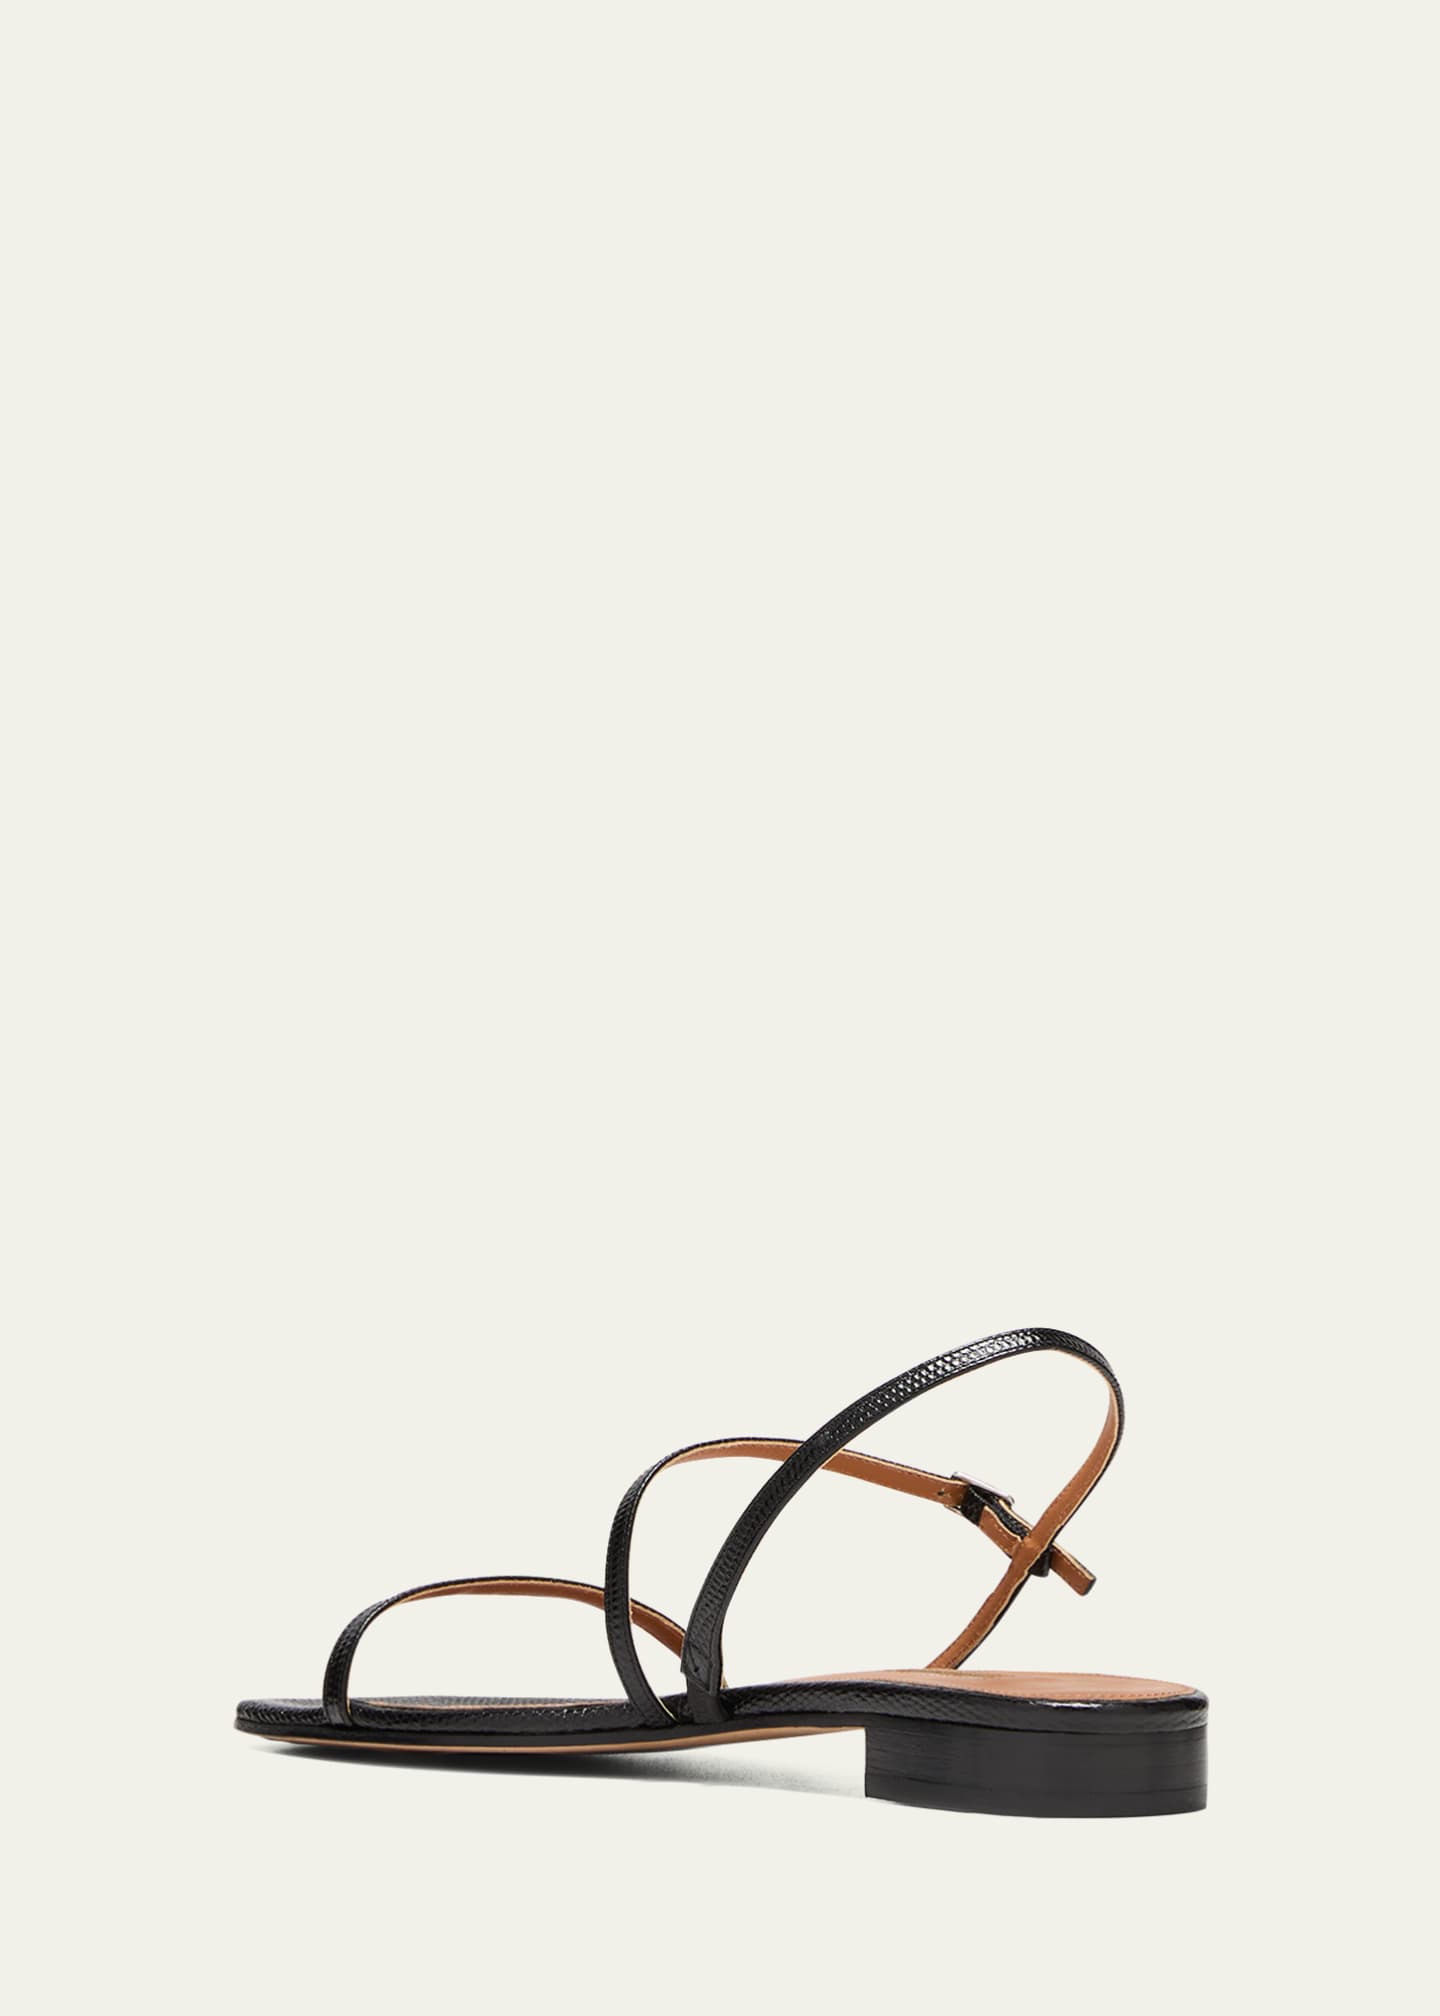 Emme Parsons Hope 10mm Flat Strappy Sandals - Bergdorf Goodman